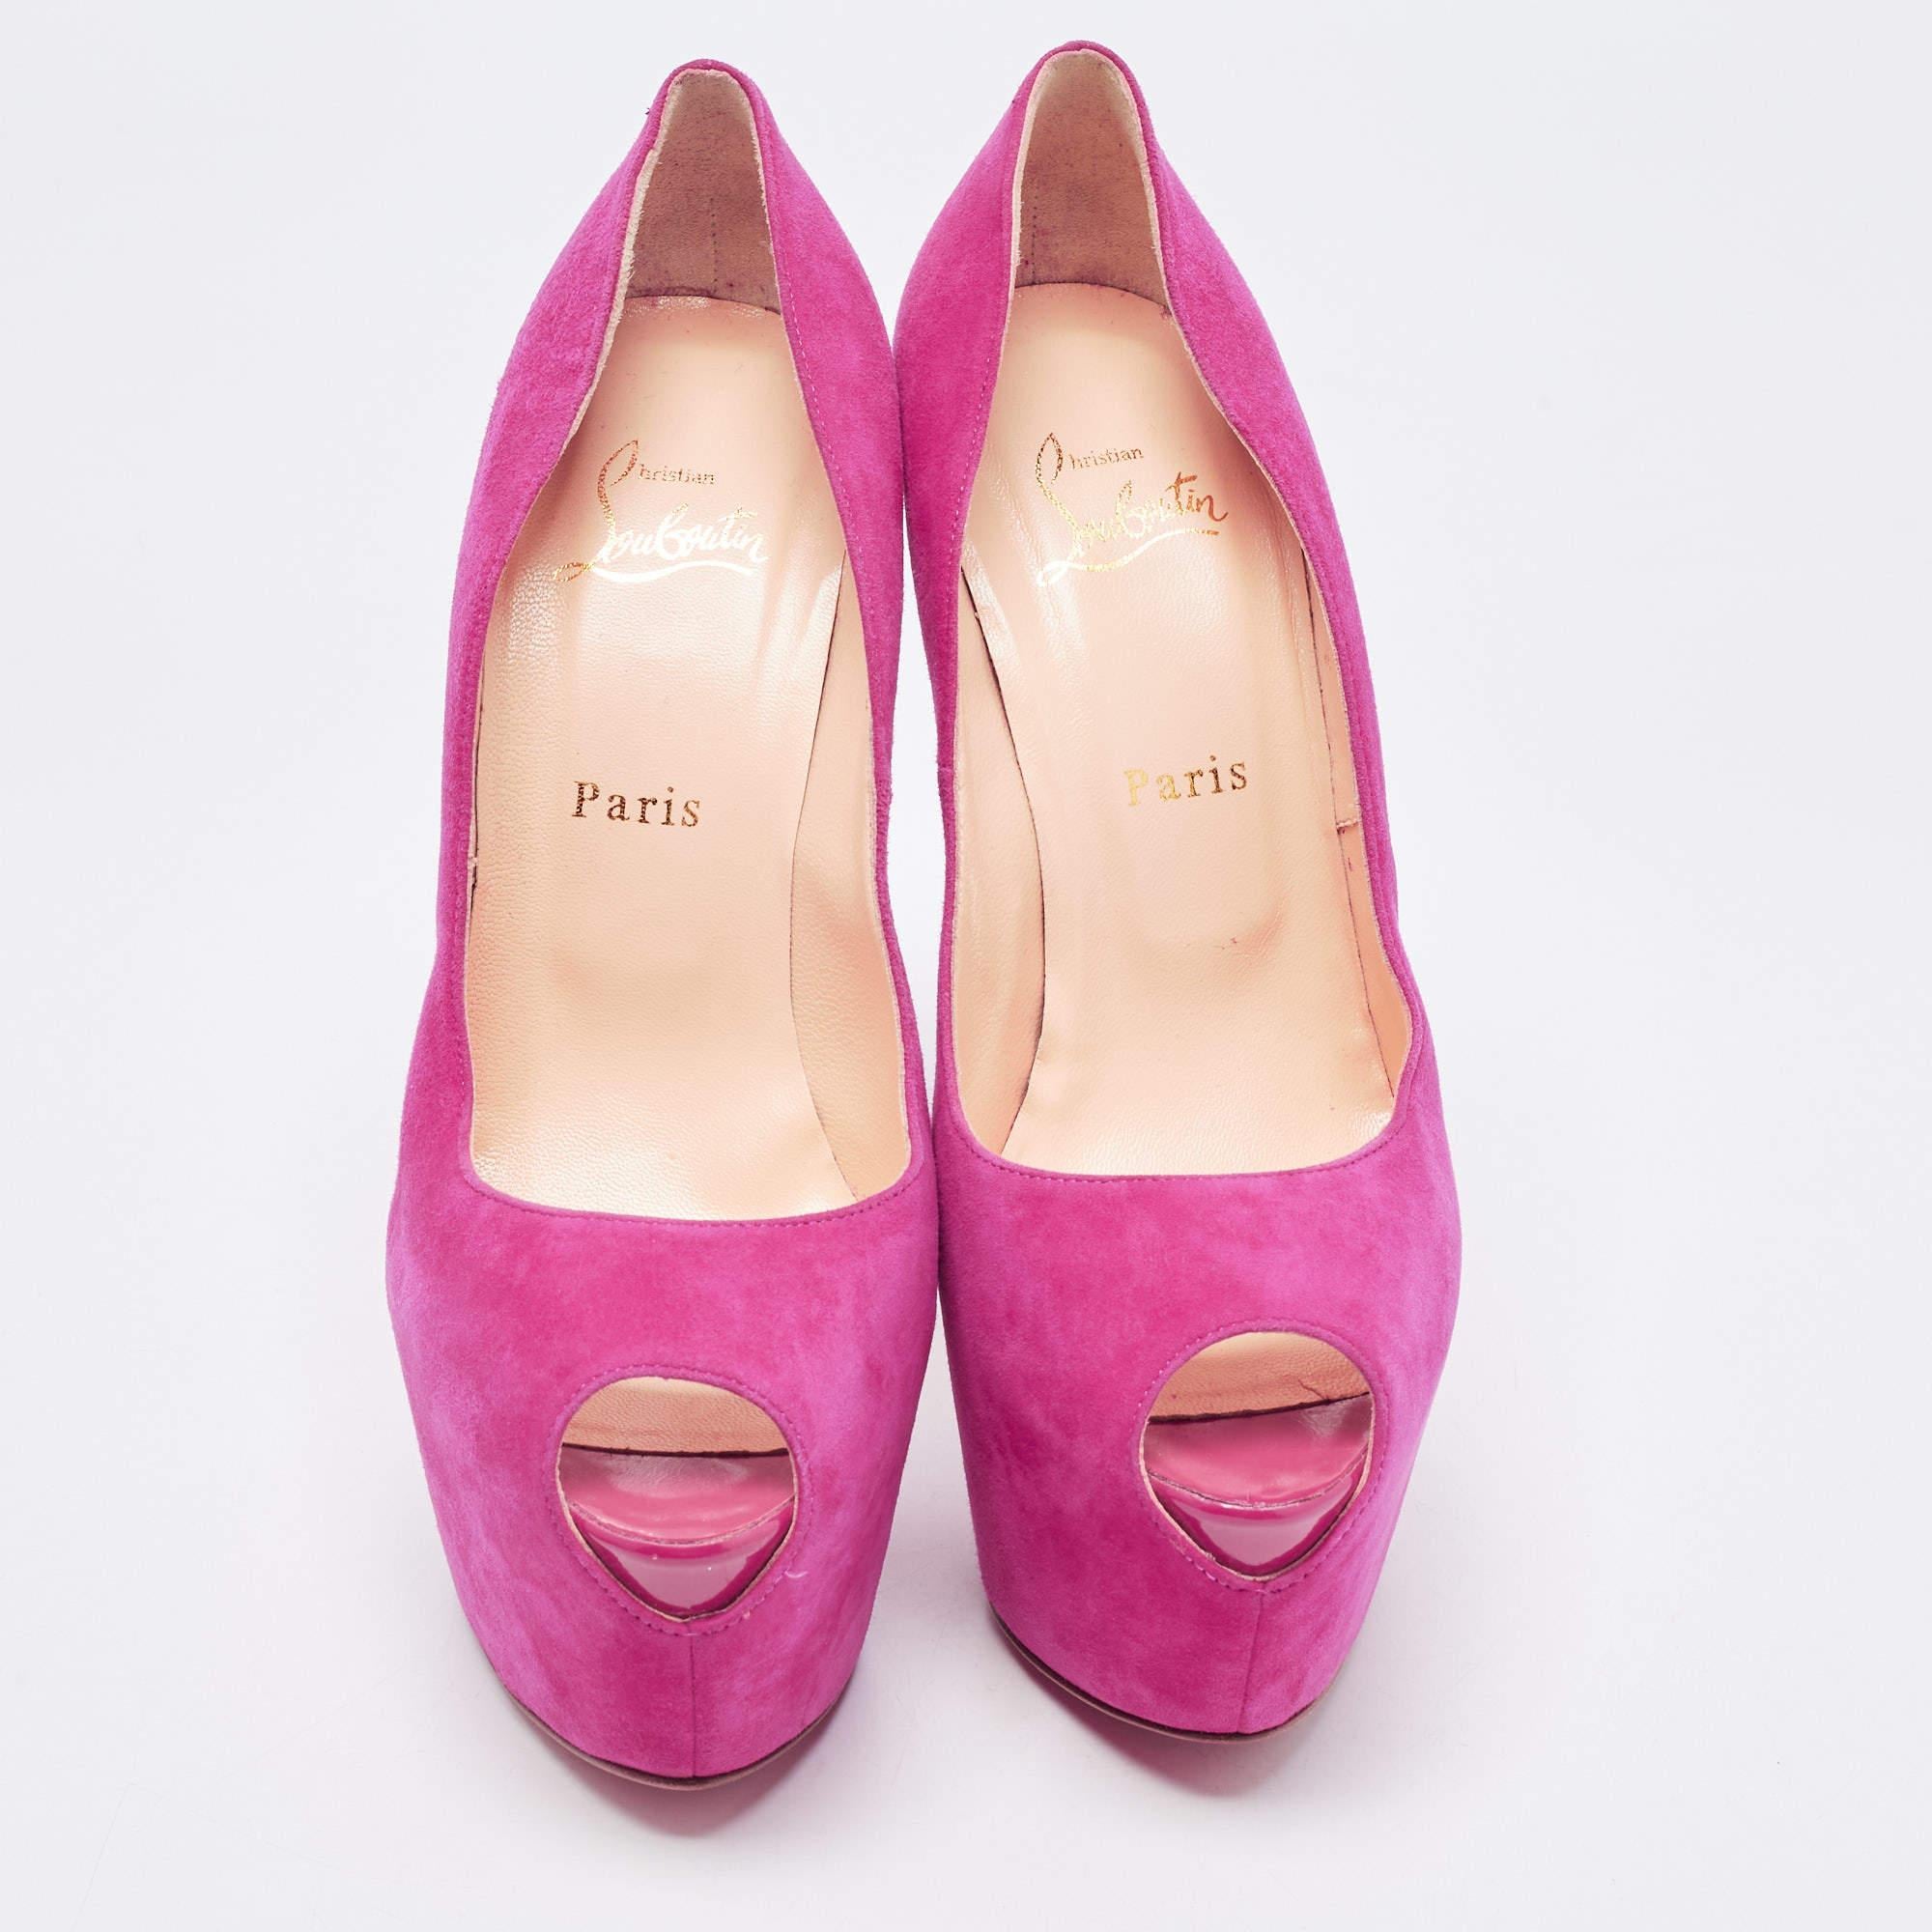 Exuding femininity and elegance, these pumps feature a chic silhouette with an attractive design. You can wear these pumps for a stylish look.

Includes
Original Dustbag